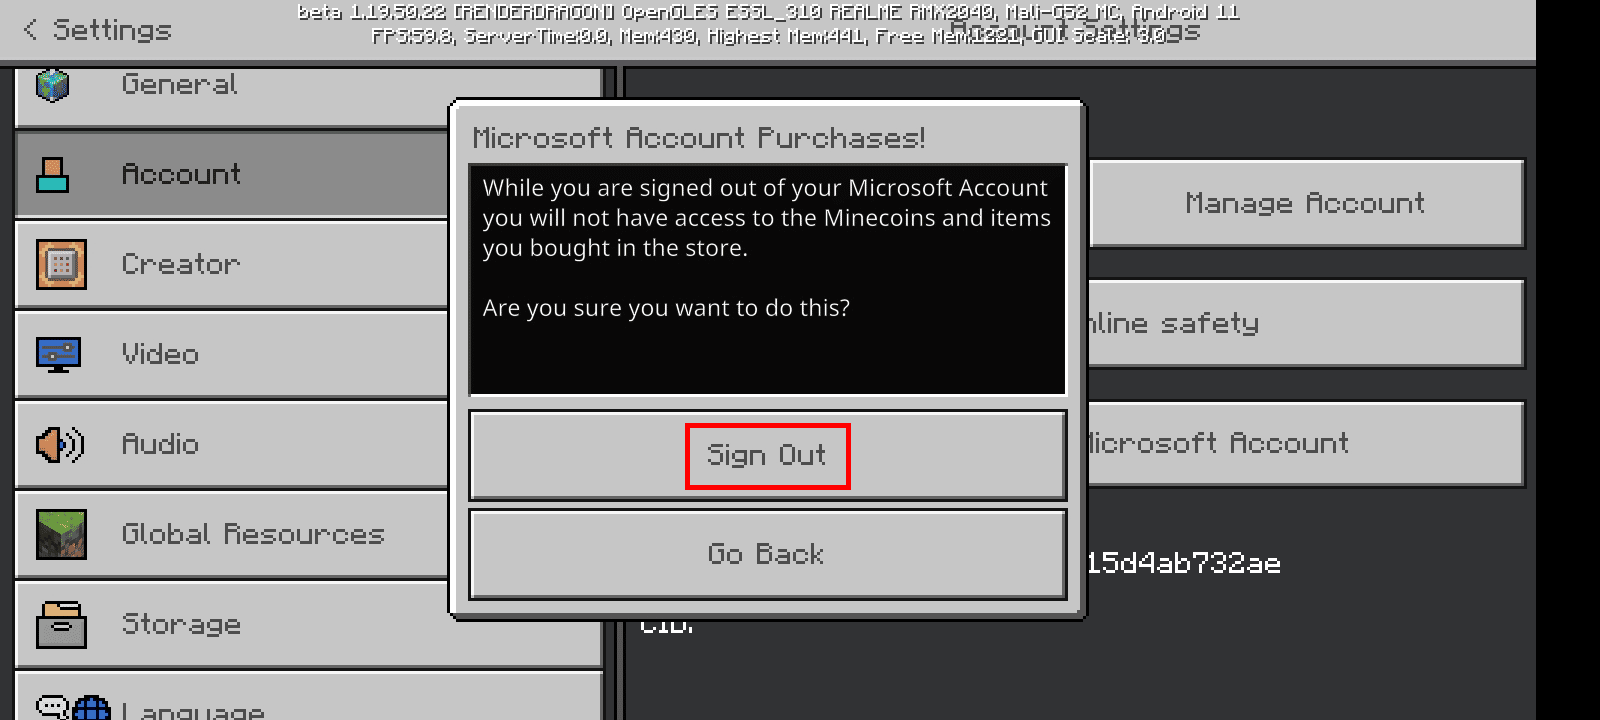 Tap on Sign Out to sign out of your current Microsoft account.